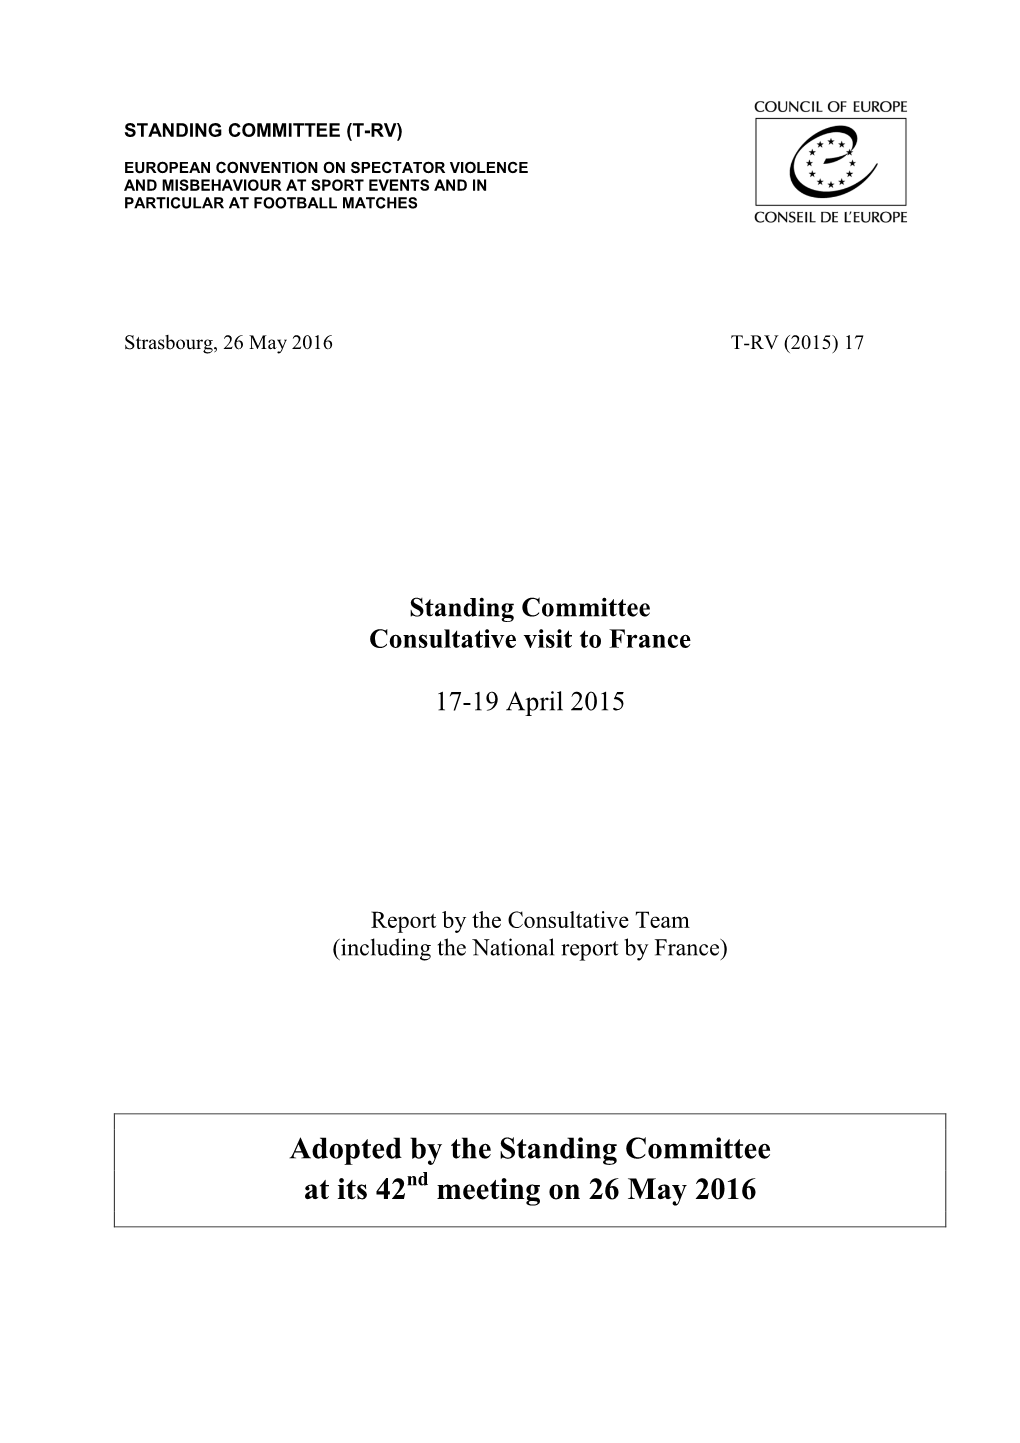 Adopted by the Standing Committee at Its 42 Meeting on 26 May 2016